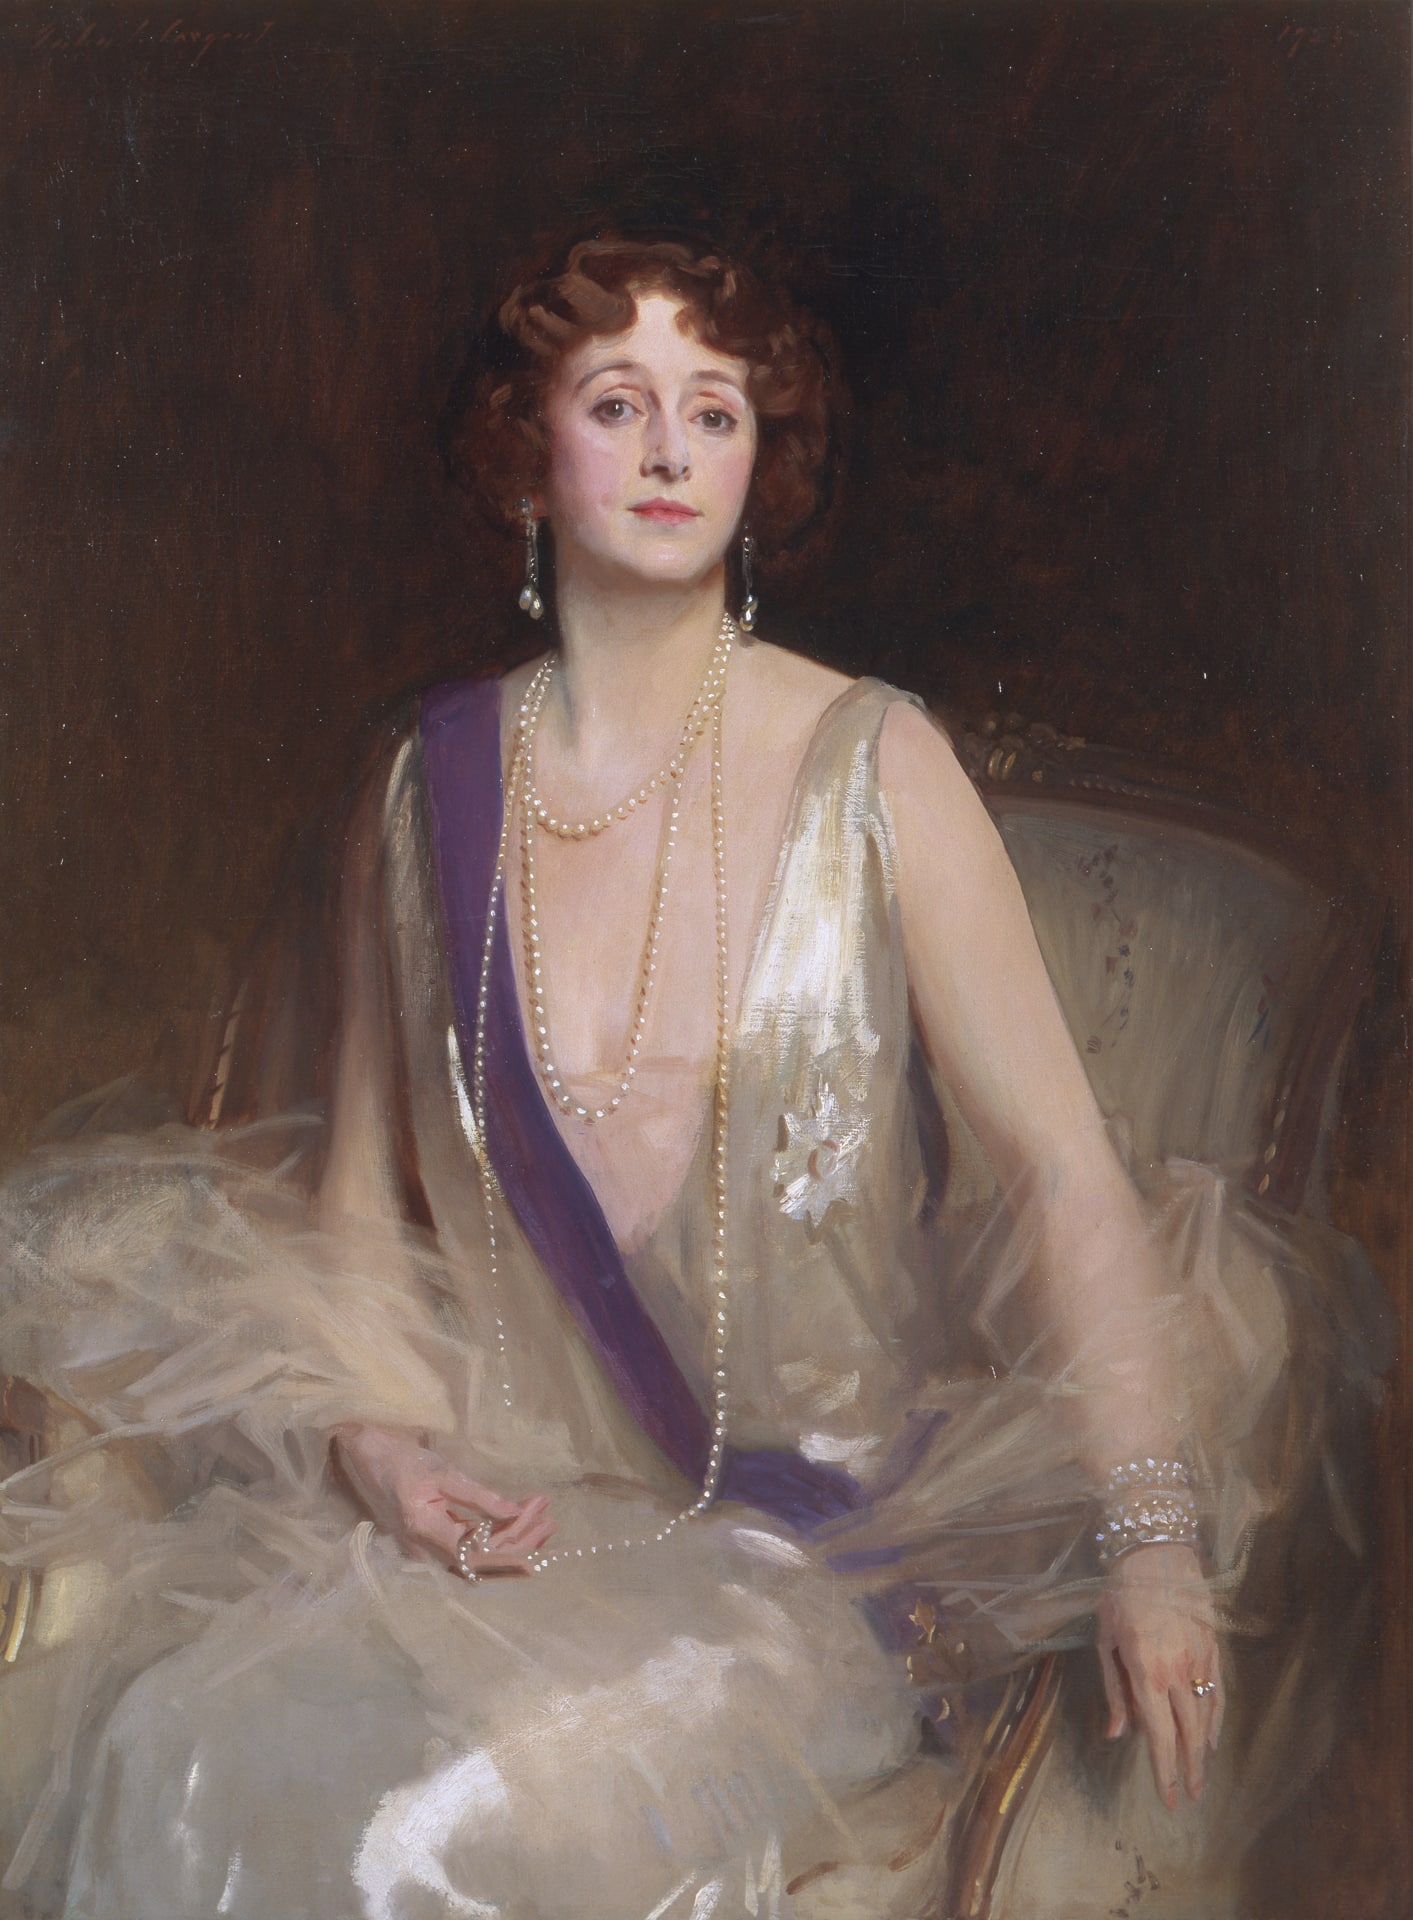 a painting of a white woman dressed in a low-cut satin dress with a purple sash and a 3 long strings of pearls seated on a chair against a dark brown background